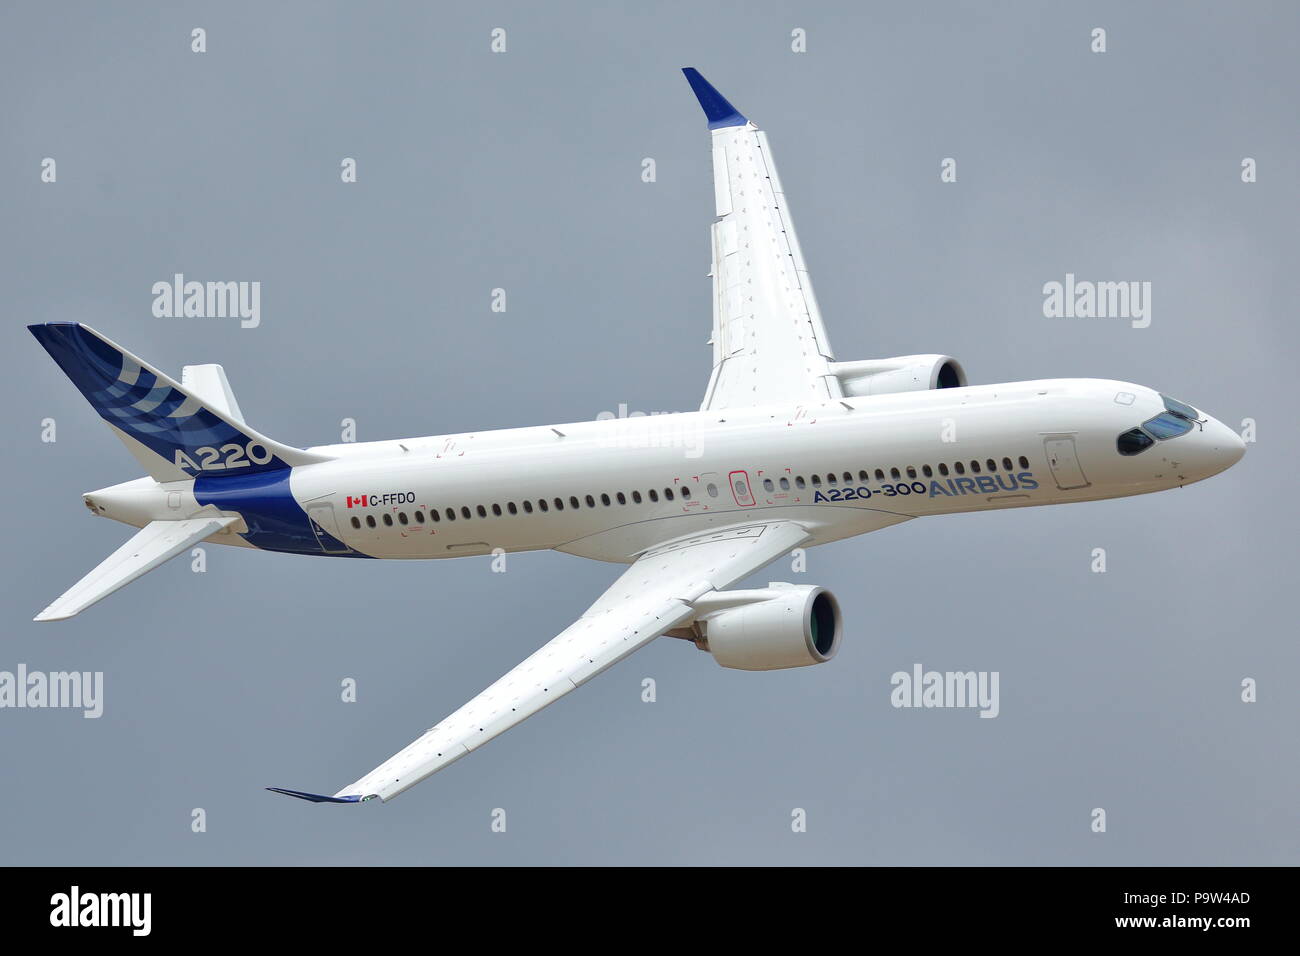 The Airbus A220-300, the latest addition to the Airbus family, showed its agility and maneuverability at the Farnborough International Airshow 2018 Stock Photo